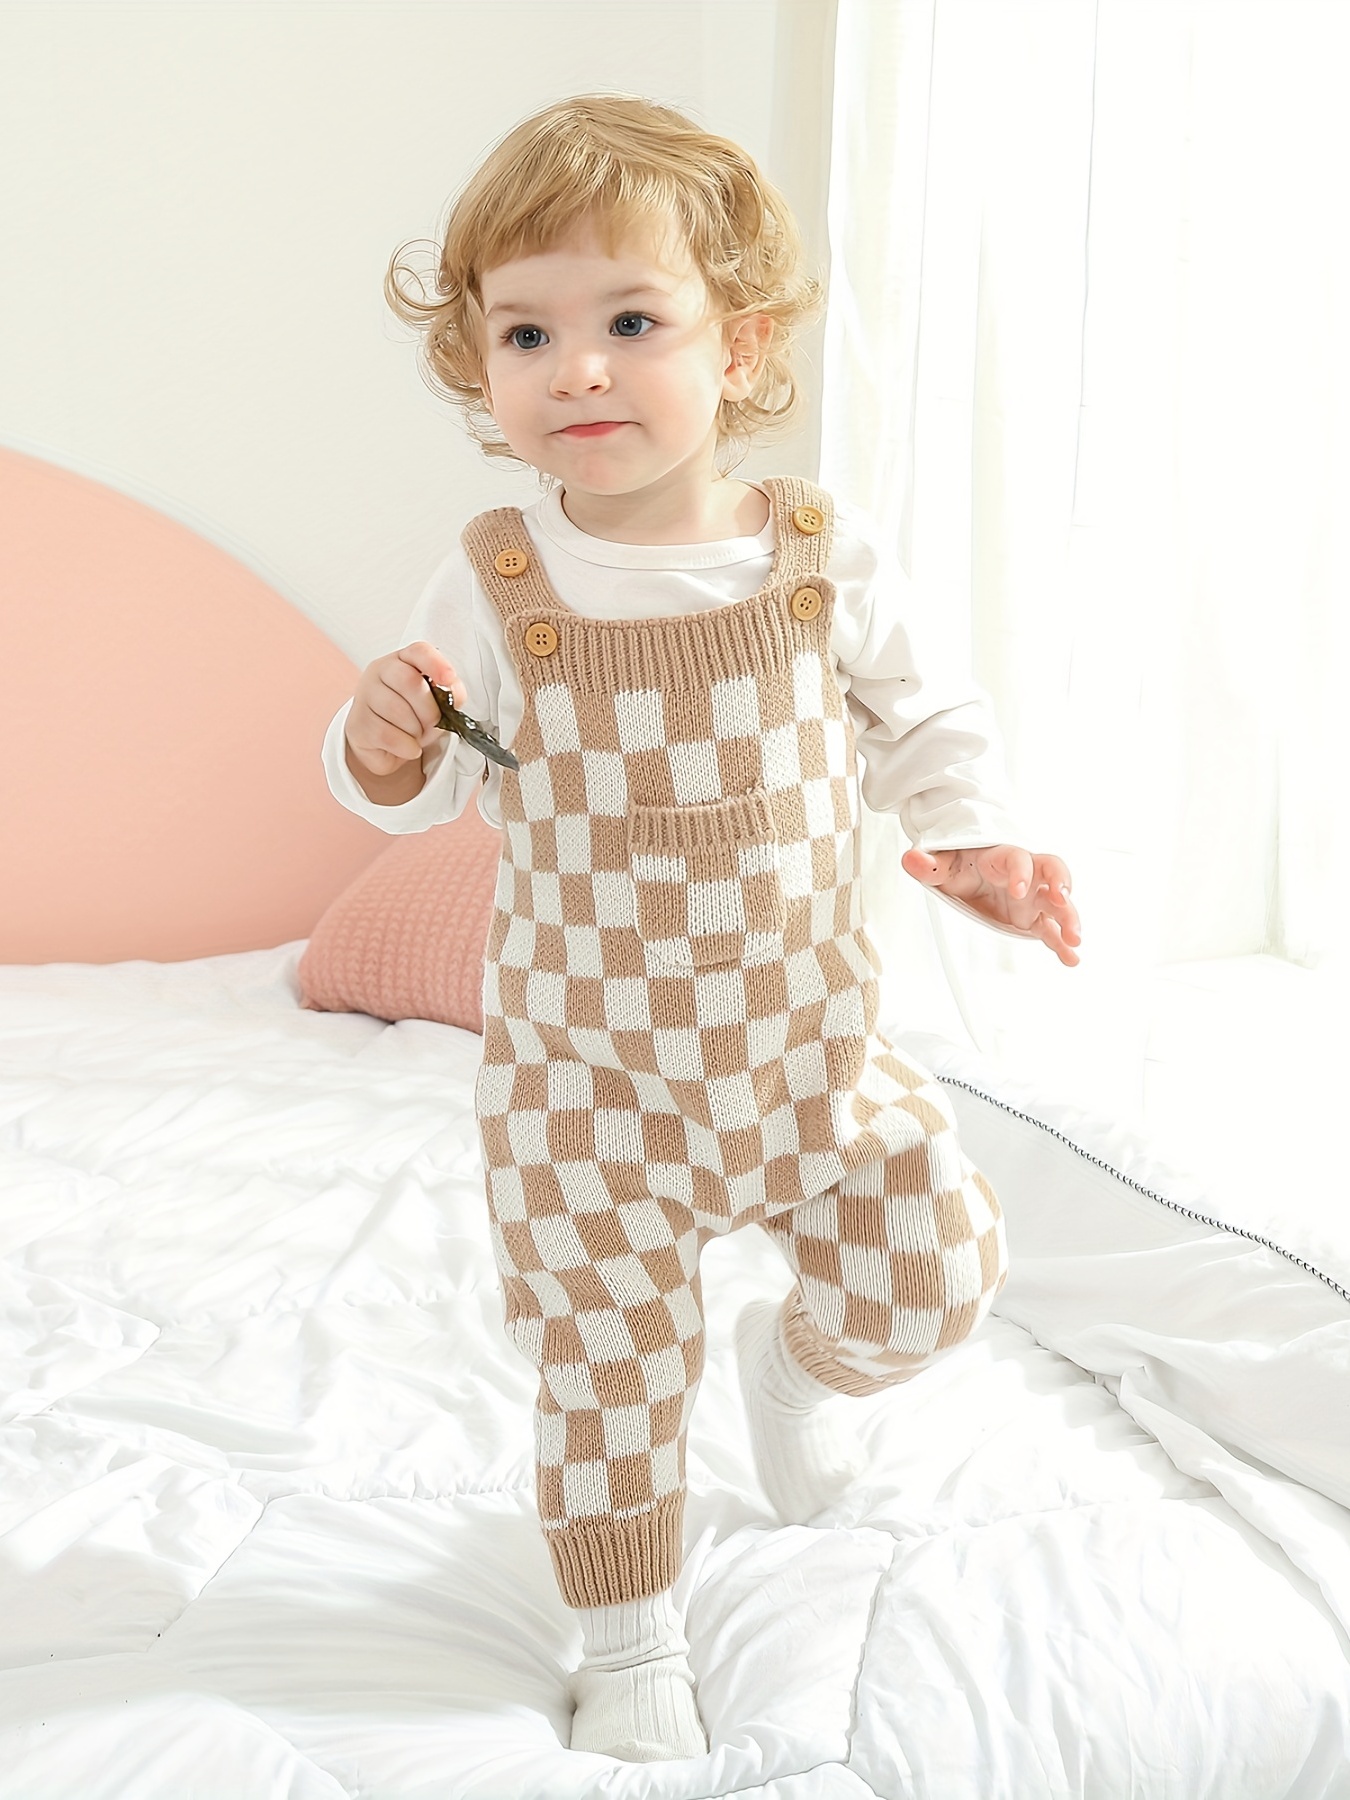 Toddler Baby Boy Checkerboard Print Romper Short/Long Sleeve Hooded Plaid Jumpsuit Bodysuit Outfit Summer Clothes